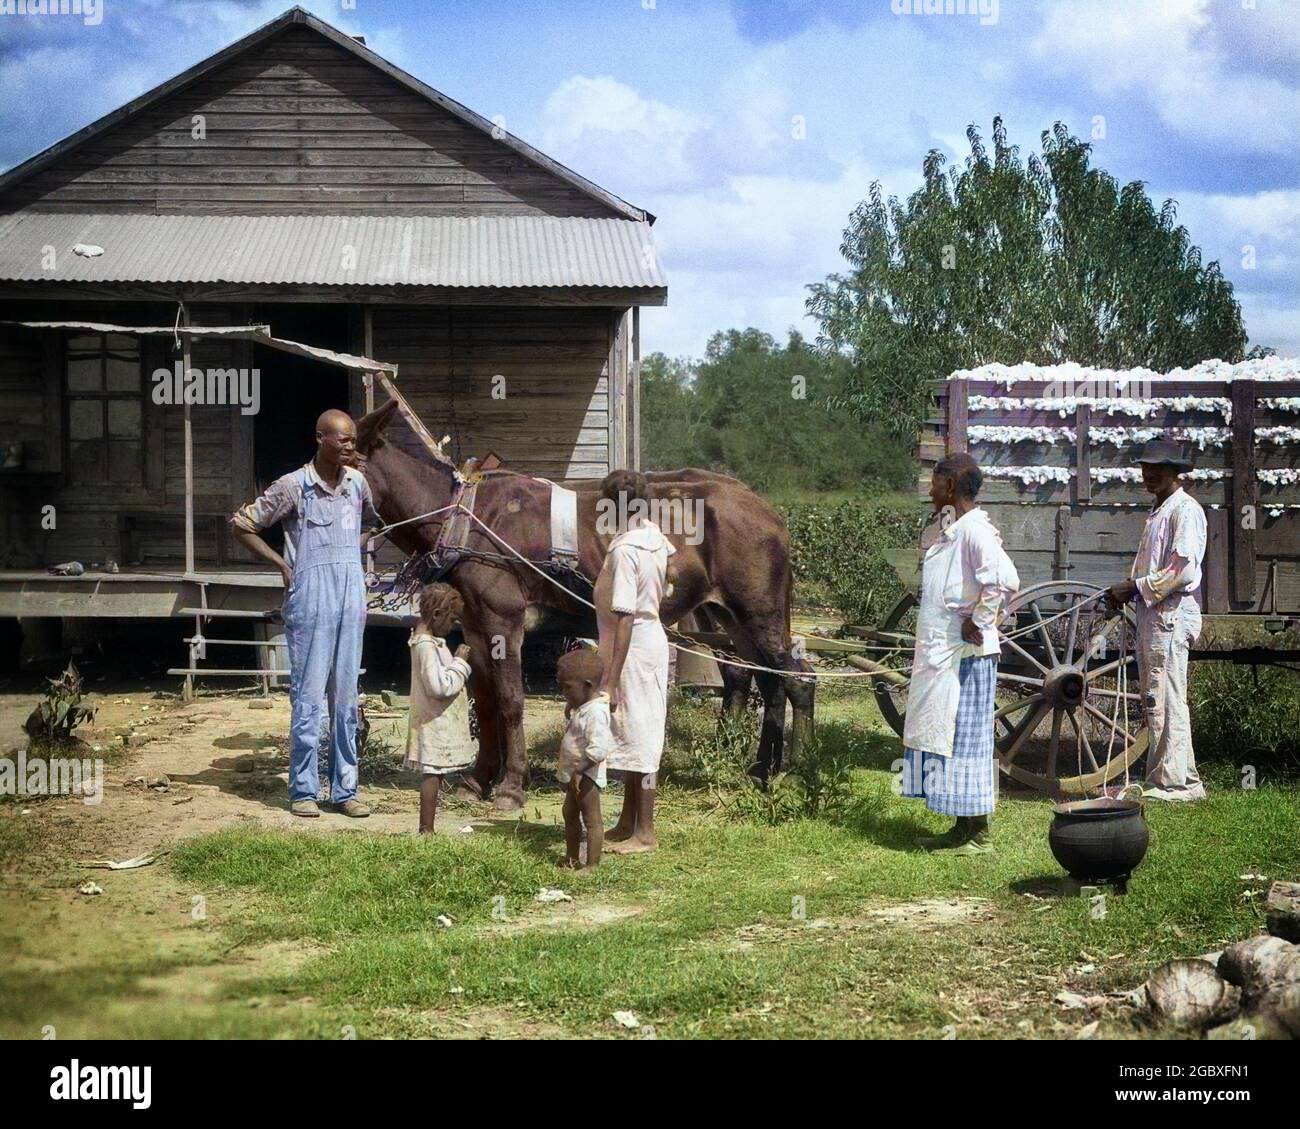 1930s AFRICAN AMERICAN SHARECROPPING TENANT FARM FAMILY OUTSIDE THEIR HOME WITH MULE DRAW WAGON OF PICKED COTTON MISSISSIPPI USA - c6256c HAR001 HARS NOSTALGIC BEAUTY COMMUNITY COLOR MOTHERS OLD TIME BUSY FUTURE NOSTALGIA BROTHER INDUSTRY OLD FASHION SISTER POVERTY 1 WAGON JUVENILE FEAR TEAMWORK COTTON SONS FAMILIES JOY LIFESTYLE CELEBRATION FEMALES HOUSES MARRIED BROTHERS POOR RURAL SPOUSE HUSBANDS HOME LIFE 6 COPY SPACE FULL-LENGTH LADIES DAUGHTERS PERSONS RESIDENTIAL MALES RISK SIX BUILDINGS SERENITY SIBLINGS SPIRITUALITY CONFIDENCE SISTERS TRANSPORTATION DRAW FATHERS AGRICULTURE PARTNER Stock Photo